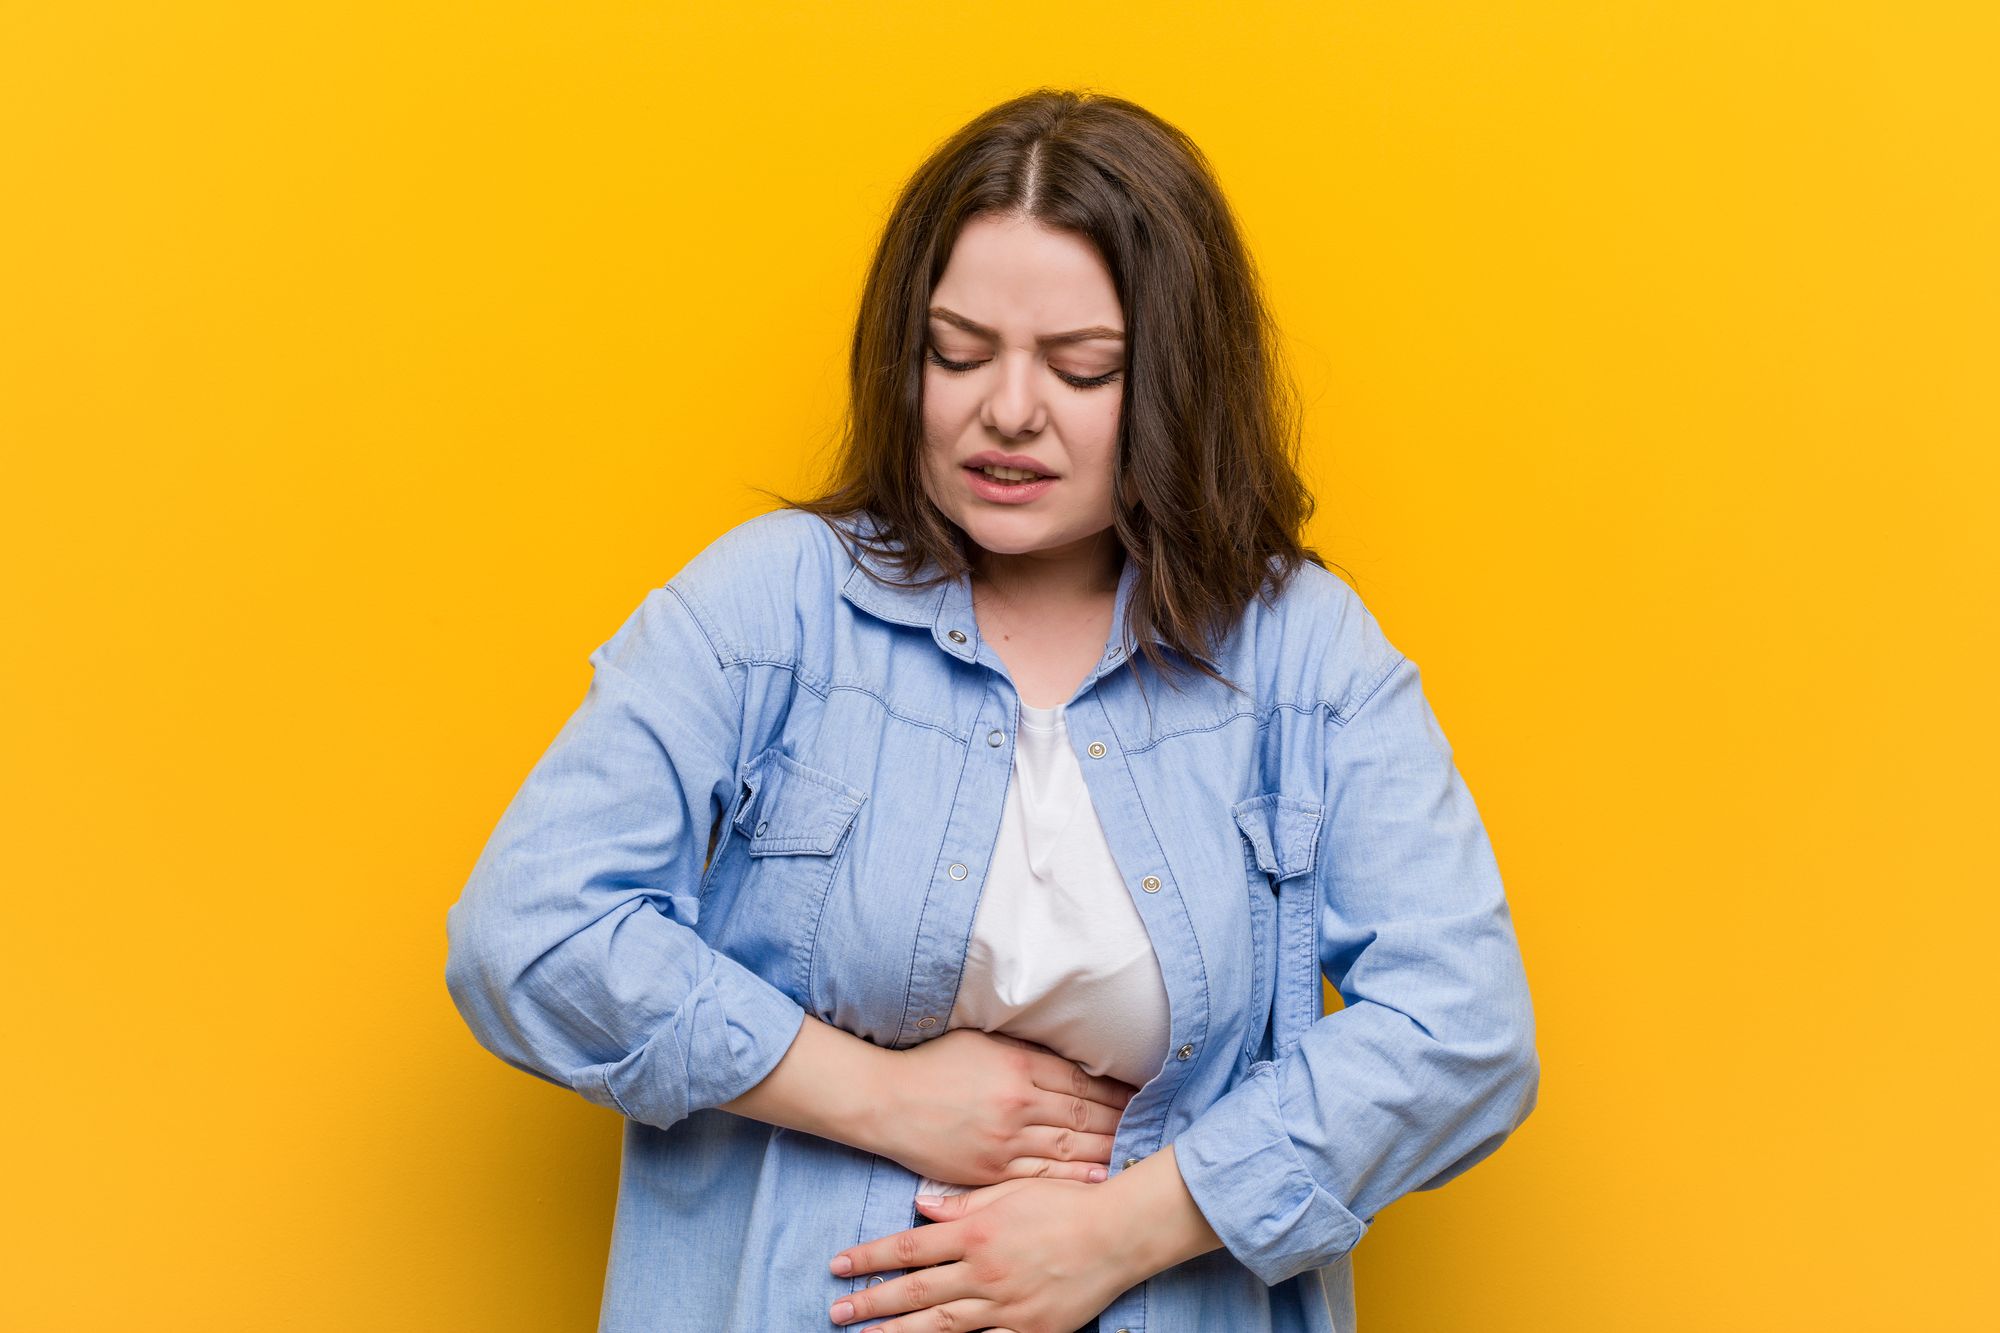 People who follow the keto diet suffer from constipation